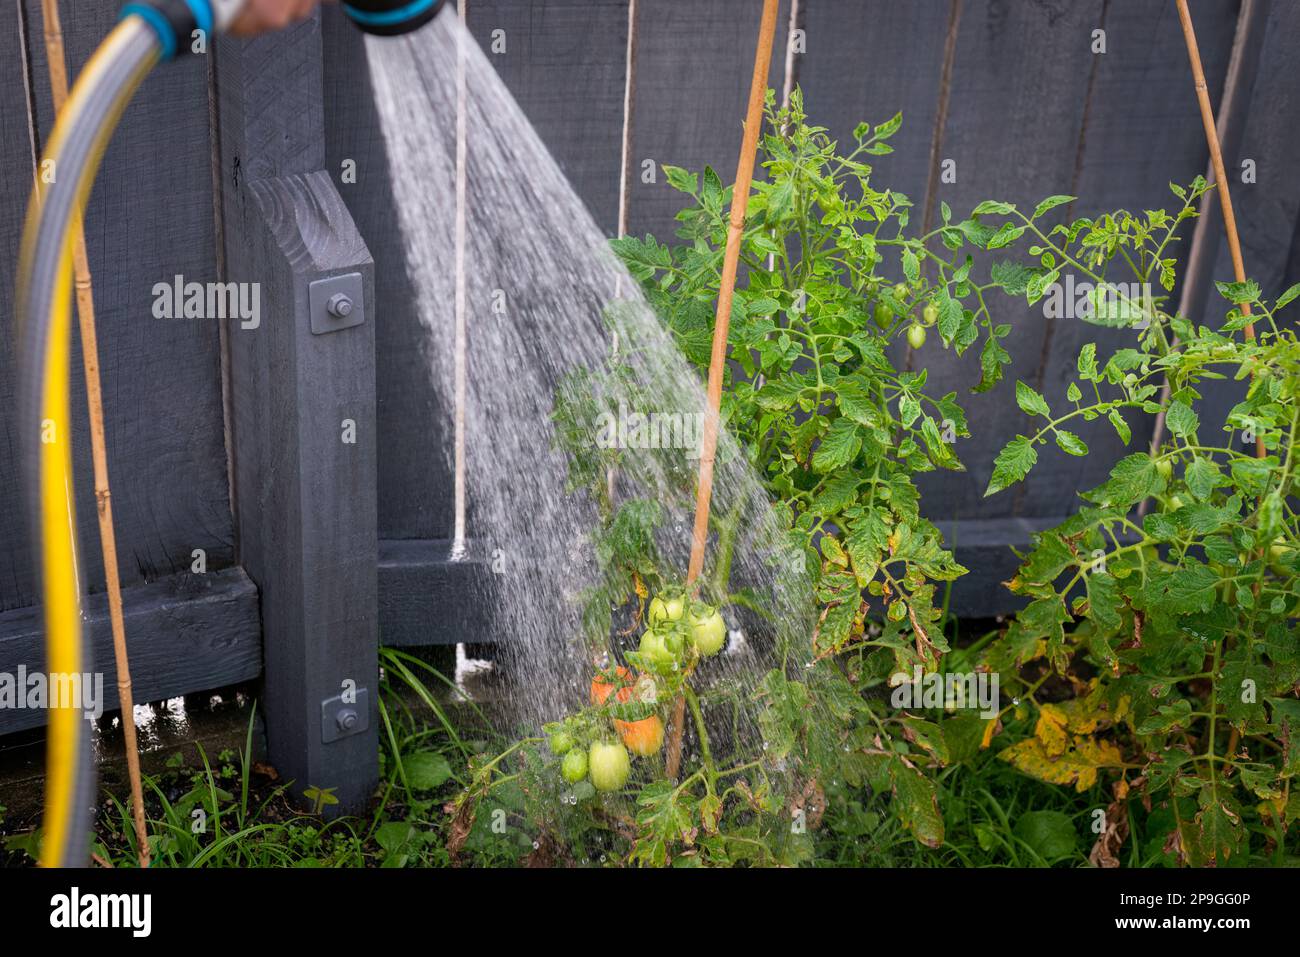 Hand holding water sprinkler and watering tomato plants in the backyard garden. Stock Photo